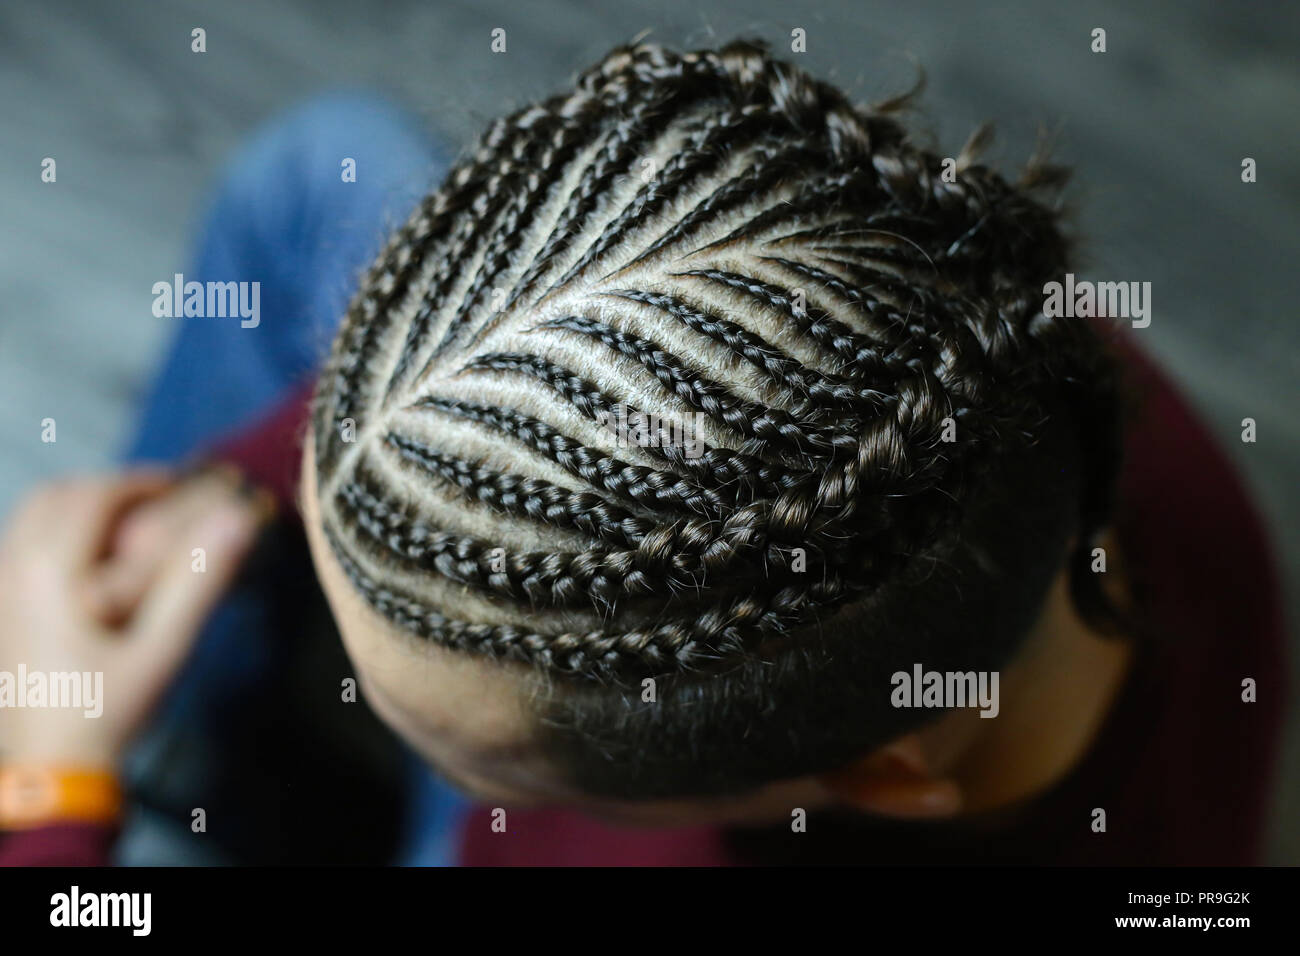 men's hairstyle from thin braids, creative waves of hair on the head of a  man, head close-up, hair, creative shaving, Iroquois, top view Stock Photo  - Alamy